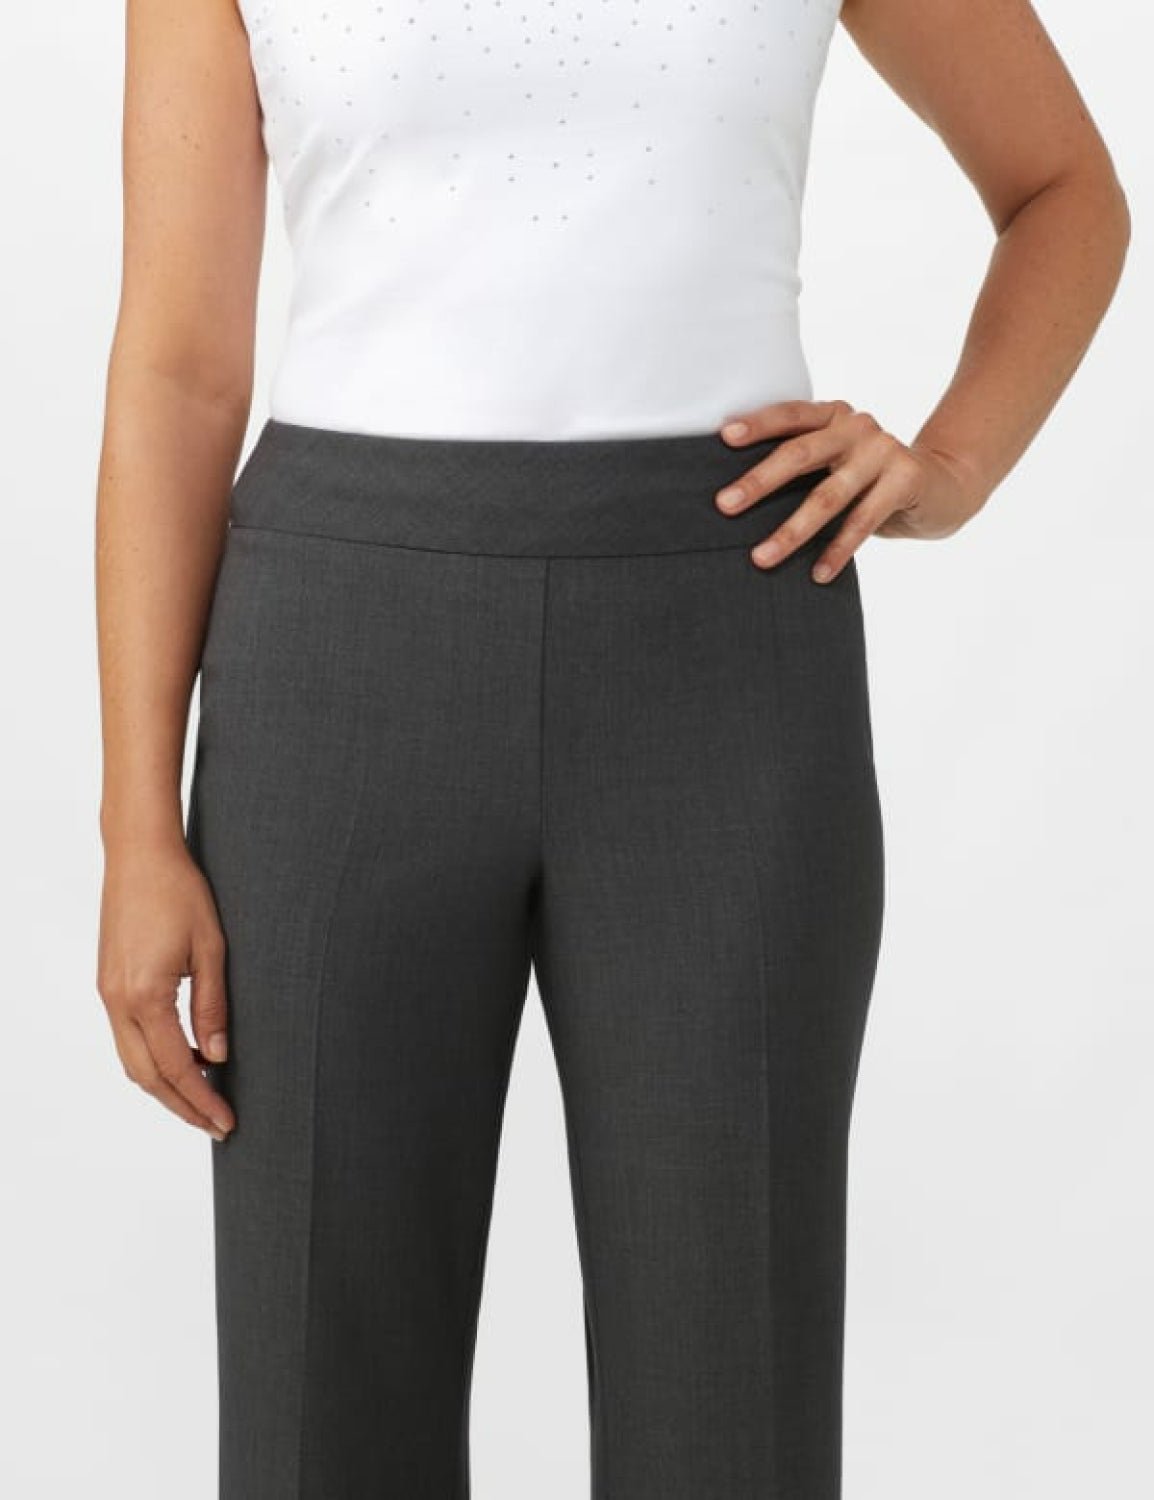 8080-3004 Skimmer Pants with Tummy Control Two Way Stretch About SOLD OUT